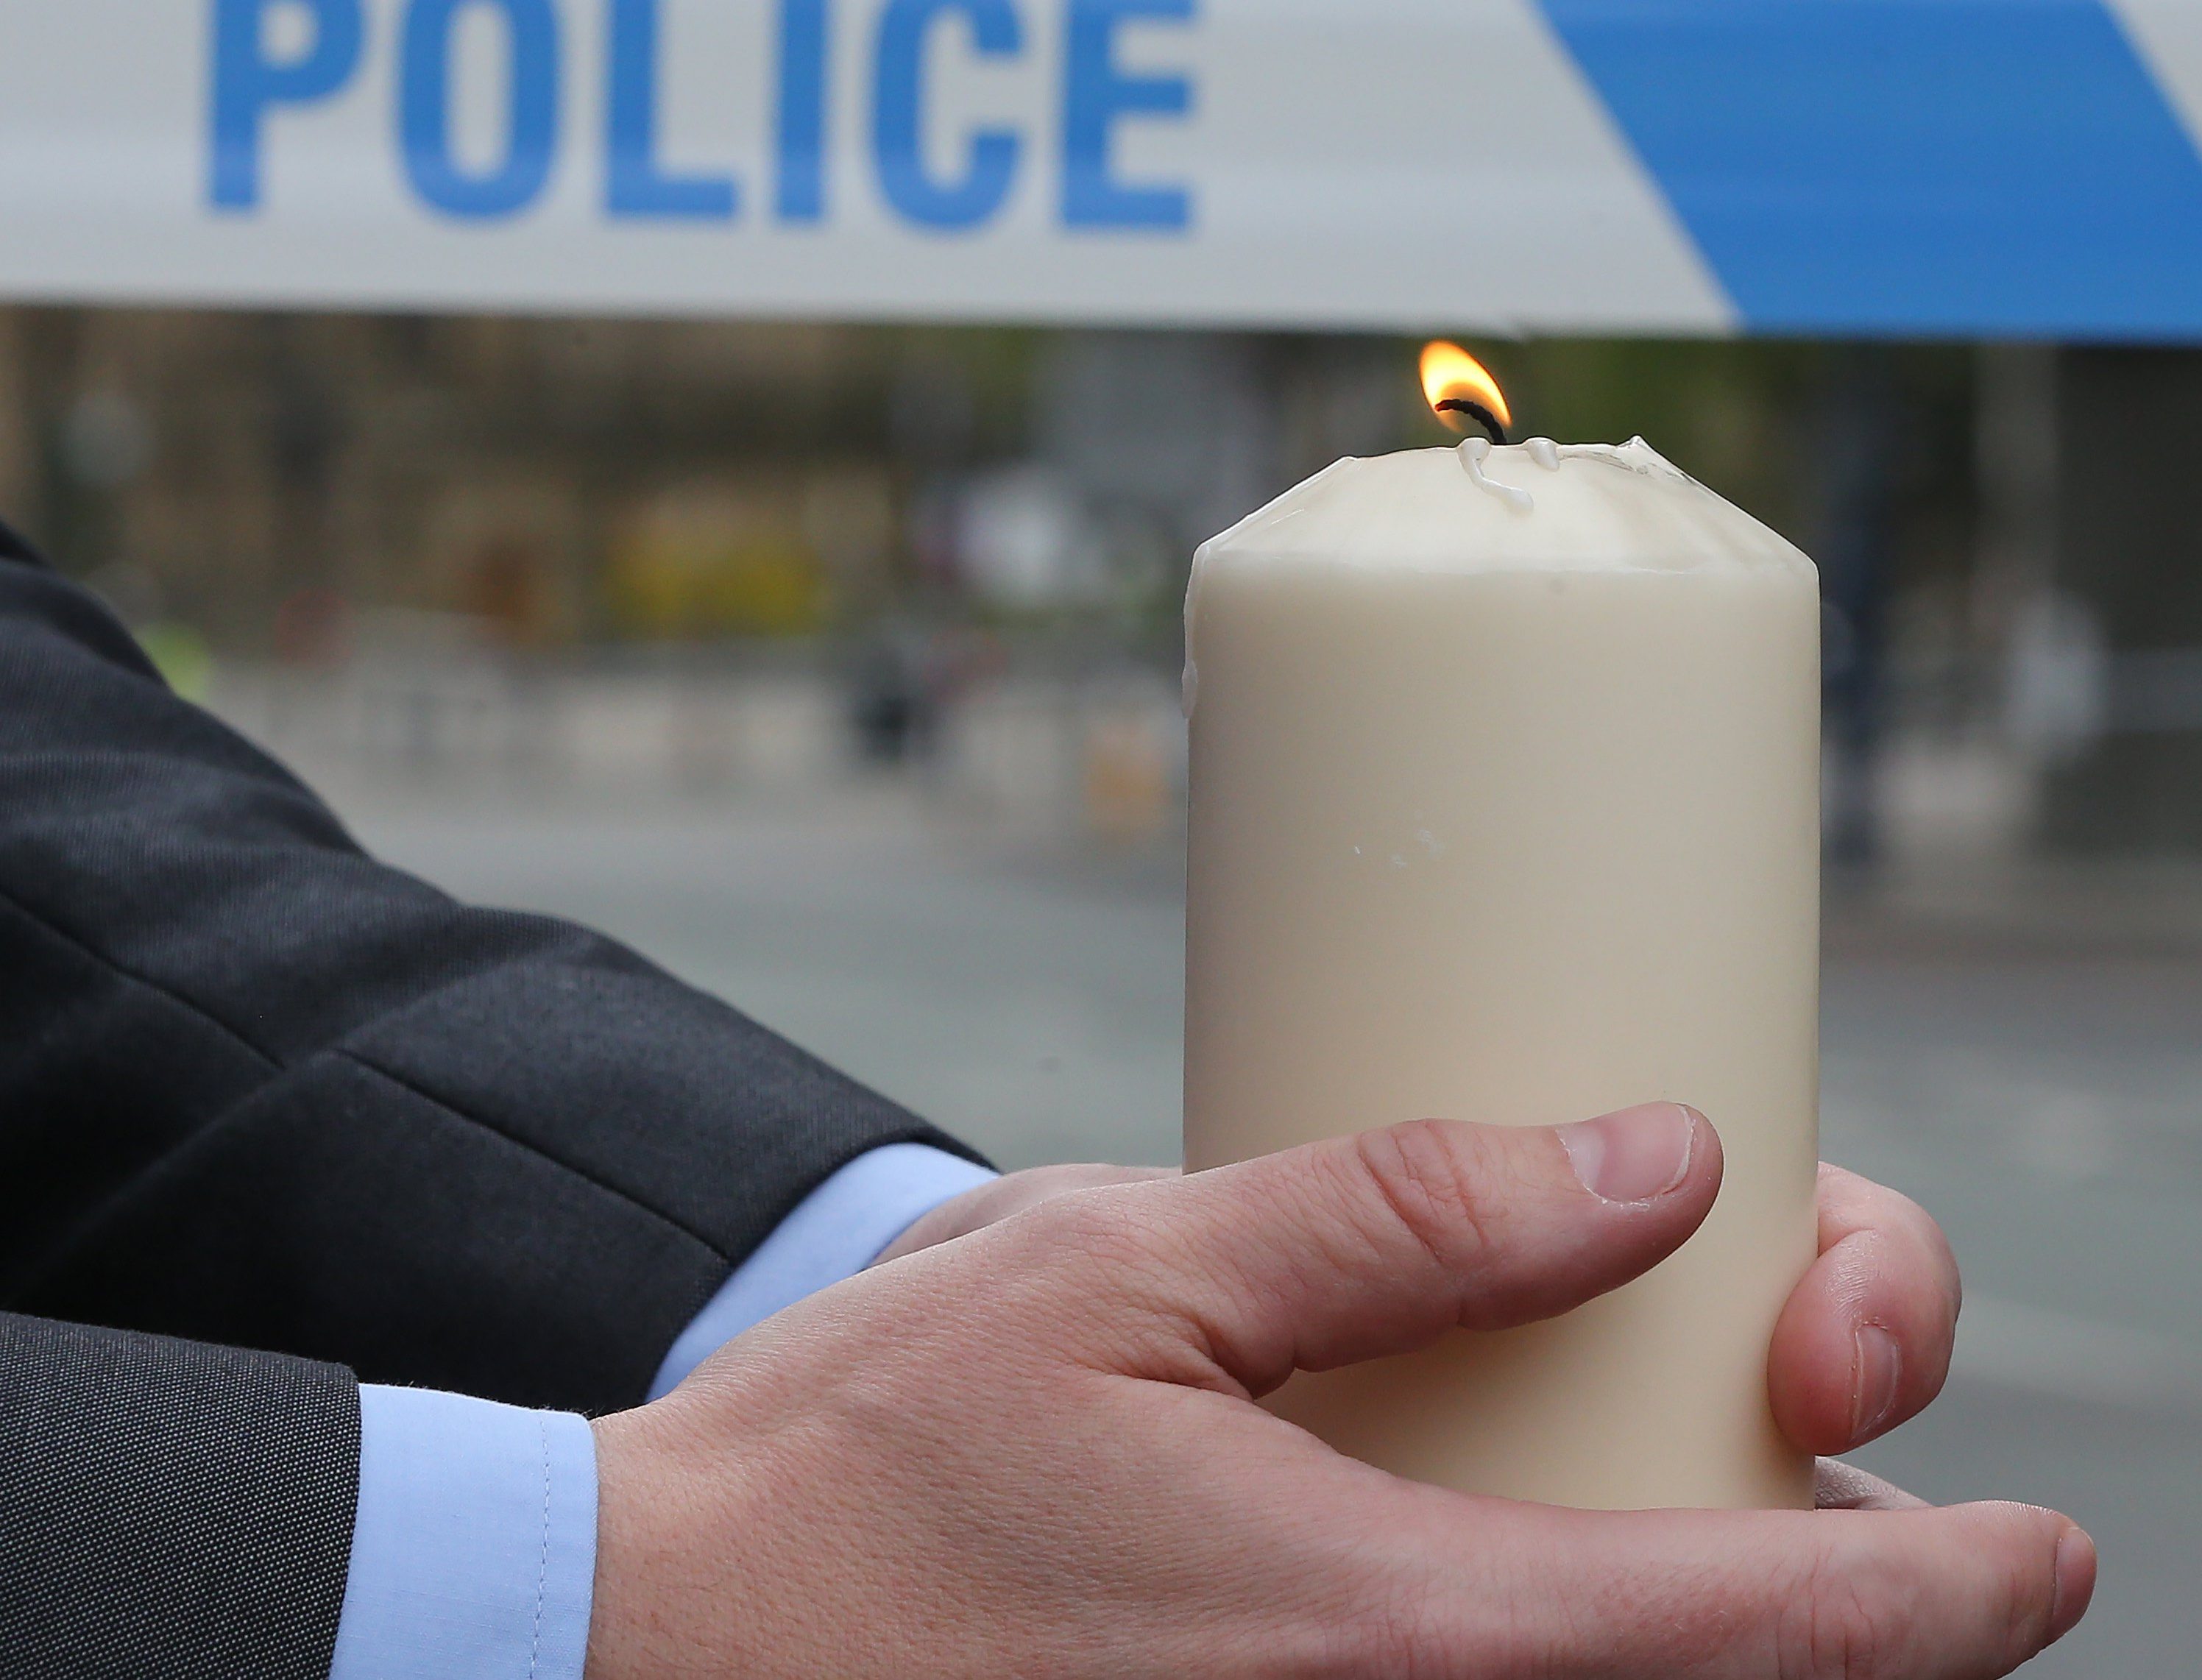 2017-05-23 05:04:36 epa05982975 A person holds a lit candle during a prayer session with the Dean of Manchester near the Manchester Arena in Manchester, Britain, 23 May 2017. According to a statement by the Greater Manchester Police, at least 22 people have been confirmed dead and around 59 others were injured, in an explosion at the Manchester Arena on the night of 22 May at the end of a concert by US singer Ariana Grande. Police believe that the explosion, which is being treated as a terrorist incident, was carried out by a single man using an improvised explosive device (IED), who was confirmed dead at the scene. EPA/NIGEL RODDIS